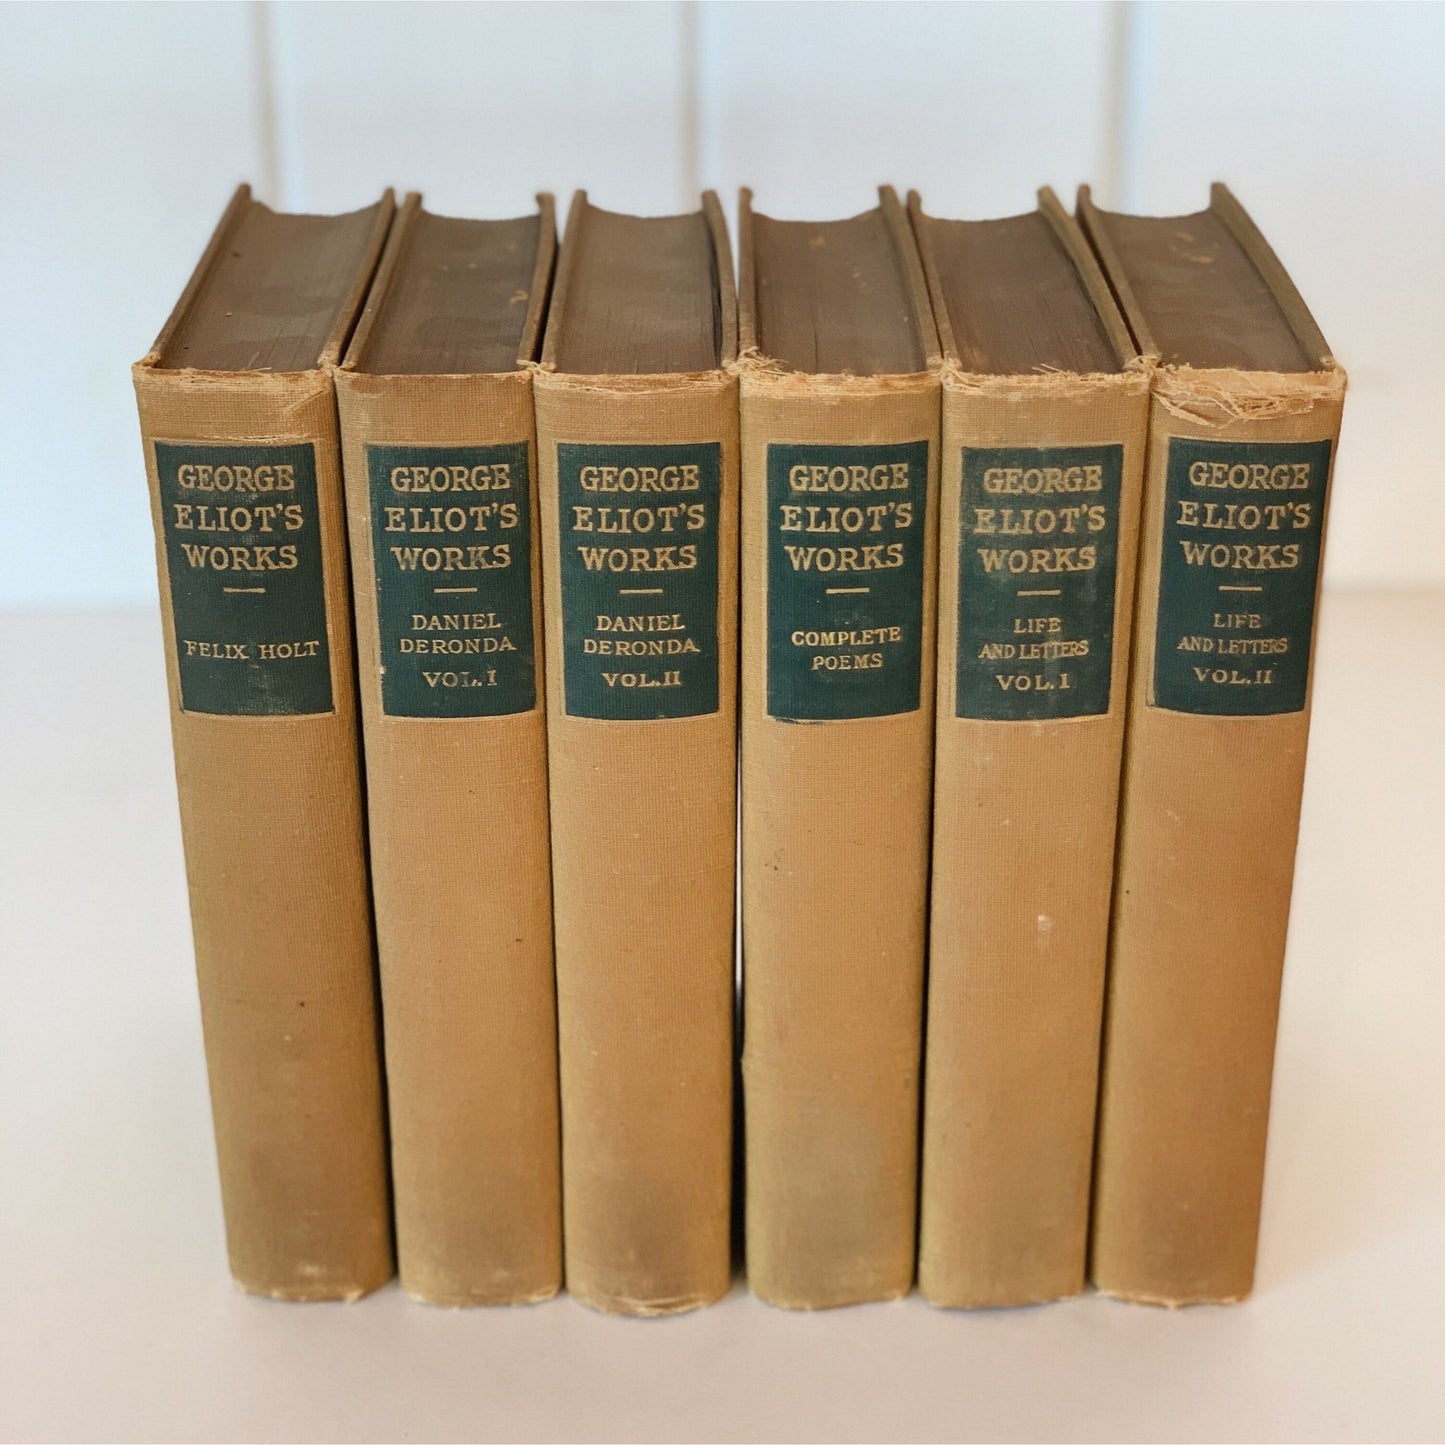 The Personal Edition of George Eliot’s Works 1904 Partial Set, Marigold Mustard Yellow Book Set